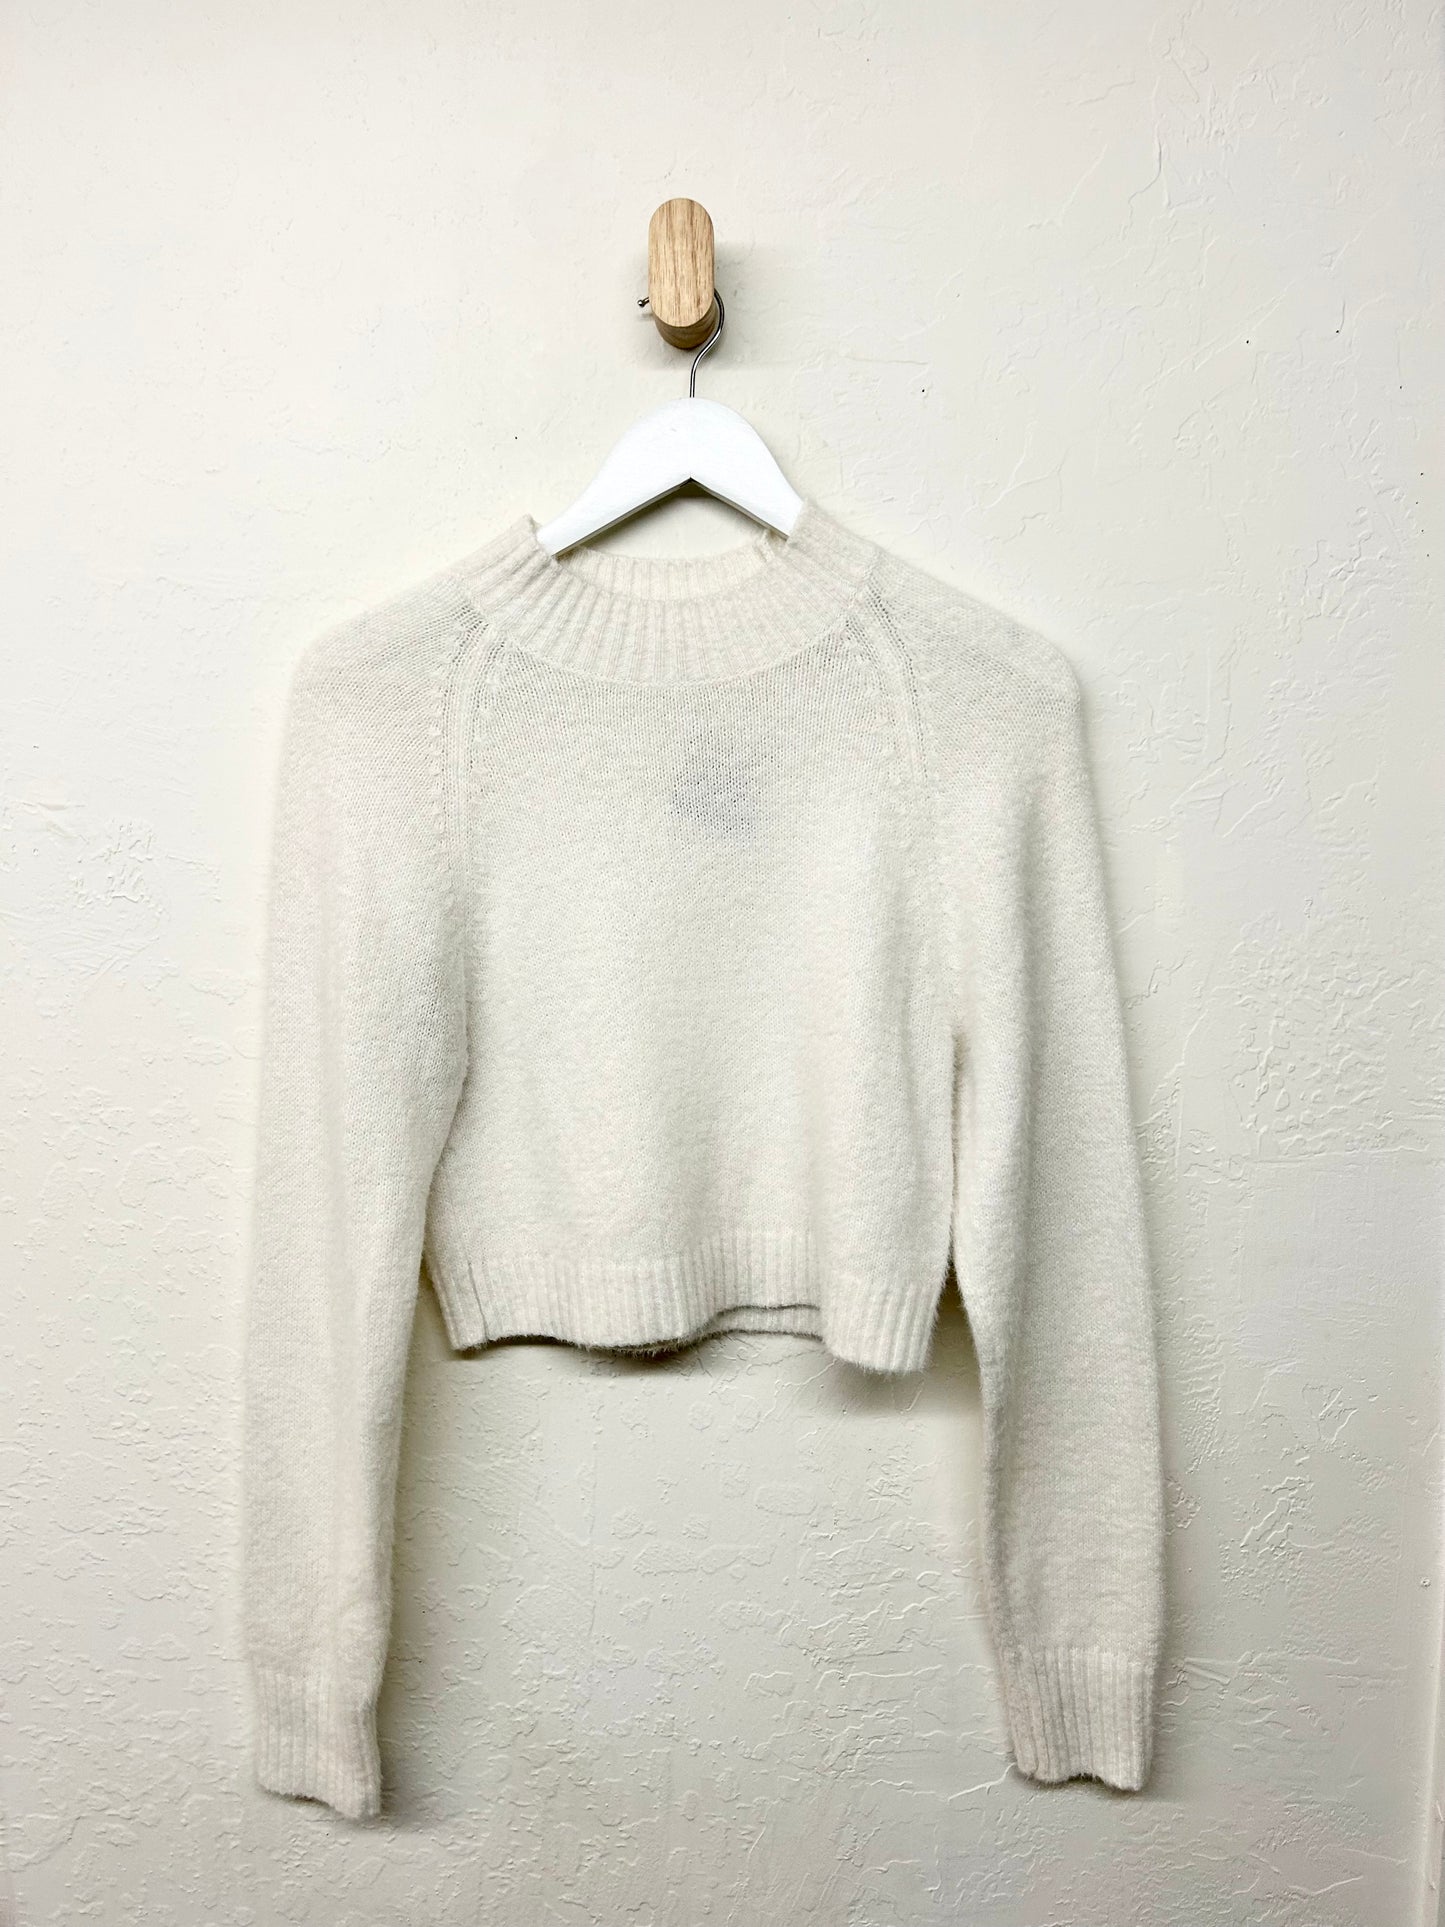 Urban Outfitters white mock neck sweater